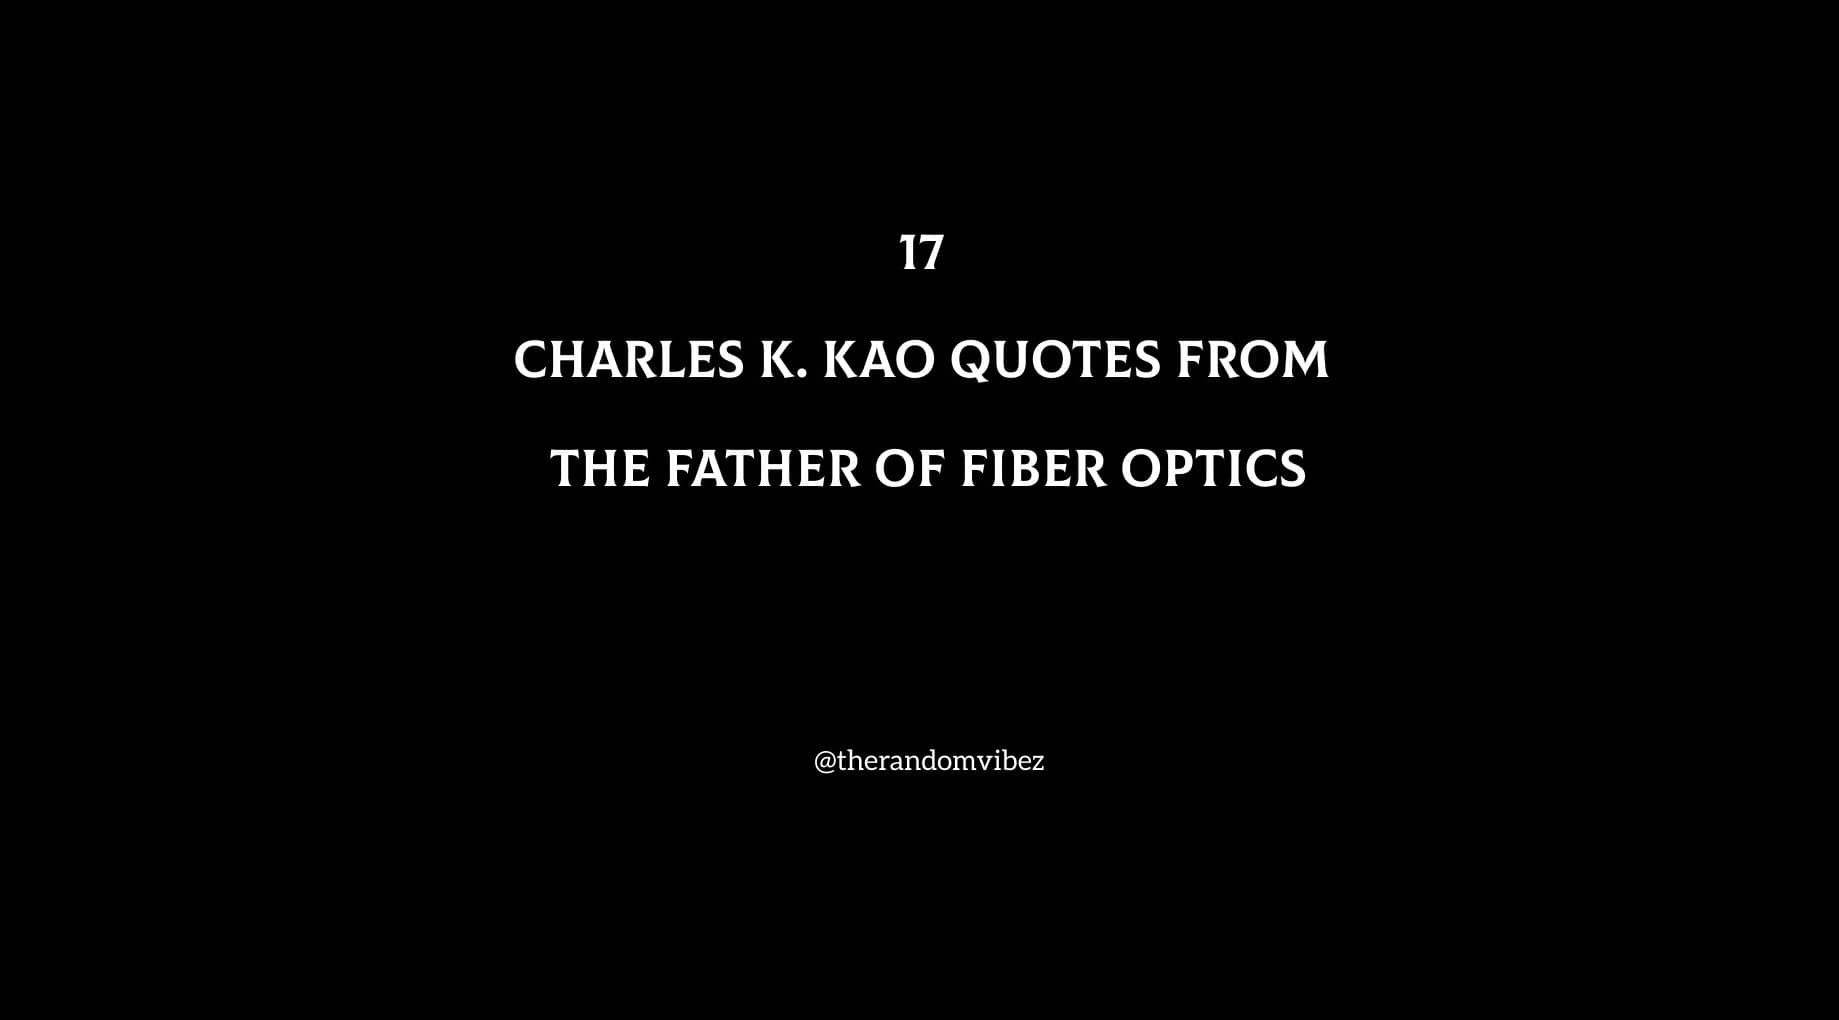 17 Charles K. Kao Quotes From The Father of Fiber Optics